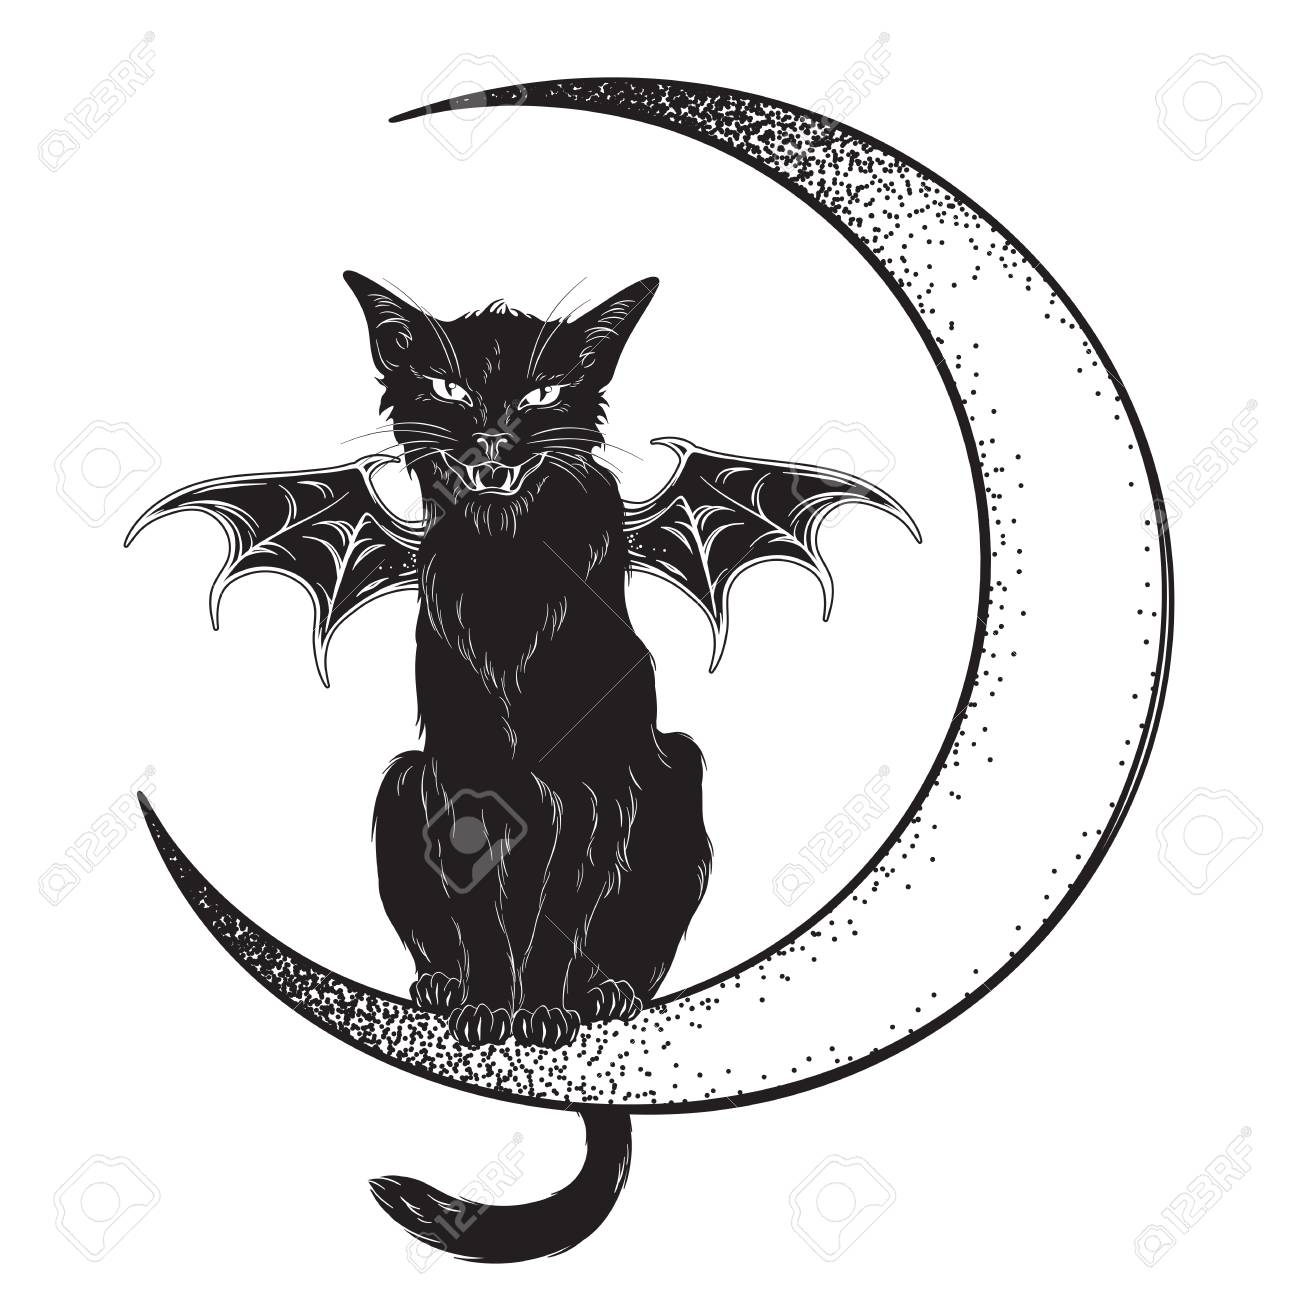 107424416-black-cat-with-bat-wings-sitting-on-the-crescent-moon-isolated-line-art-and-dotwork-vector-illustrat.jpg